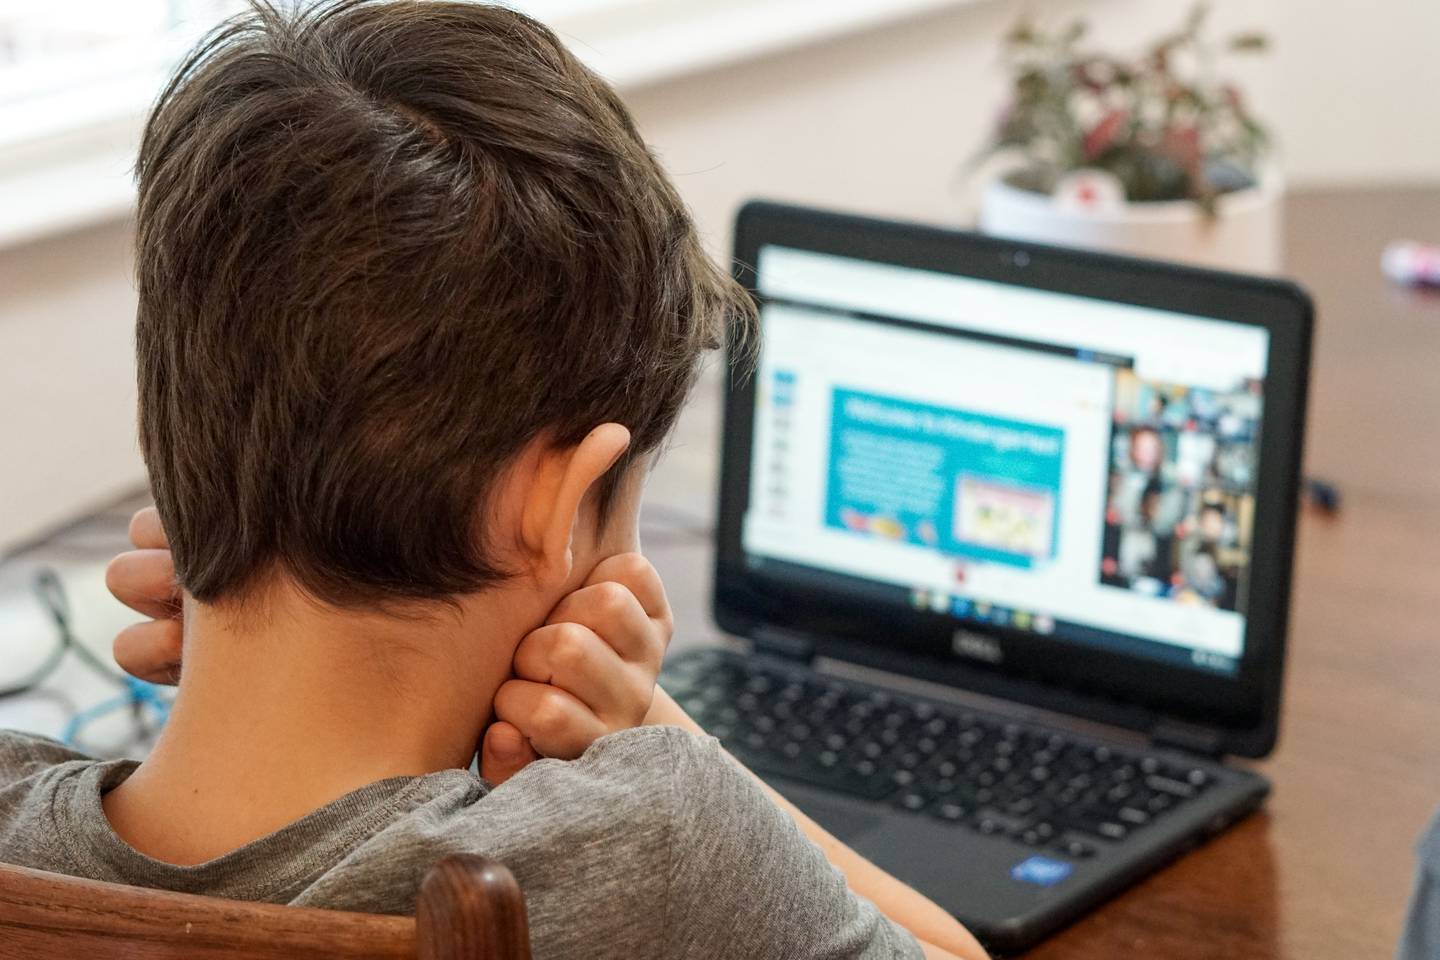 Crack the Code offers online coding classes for kids in Spanish.